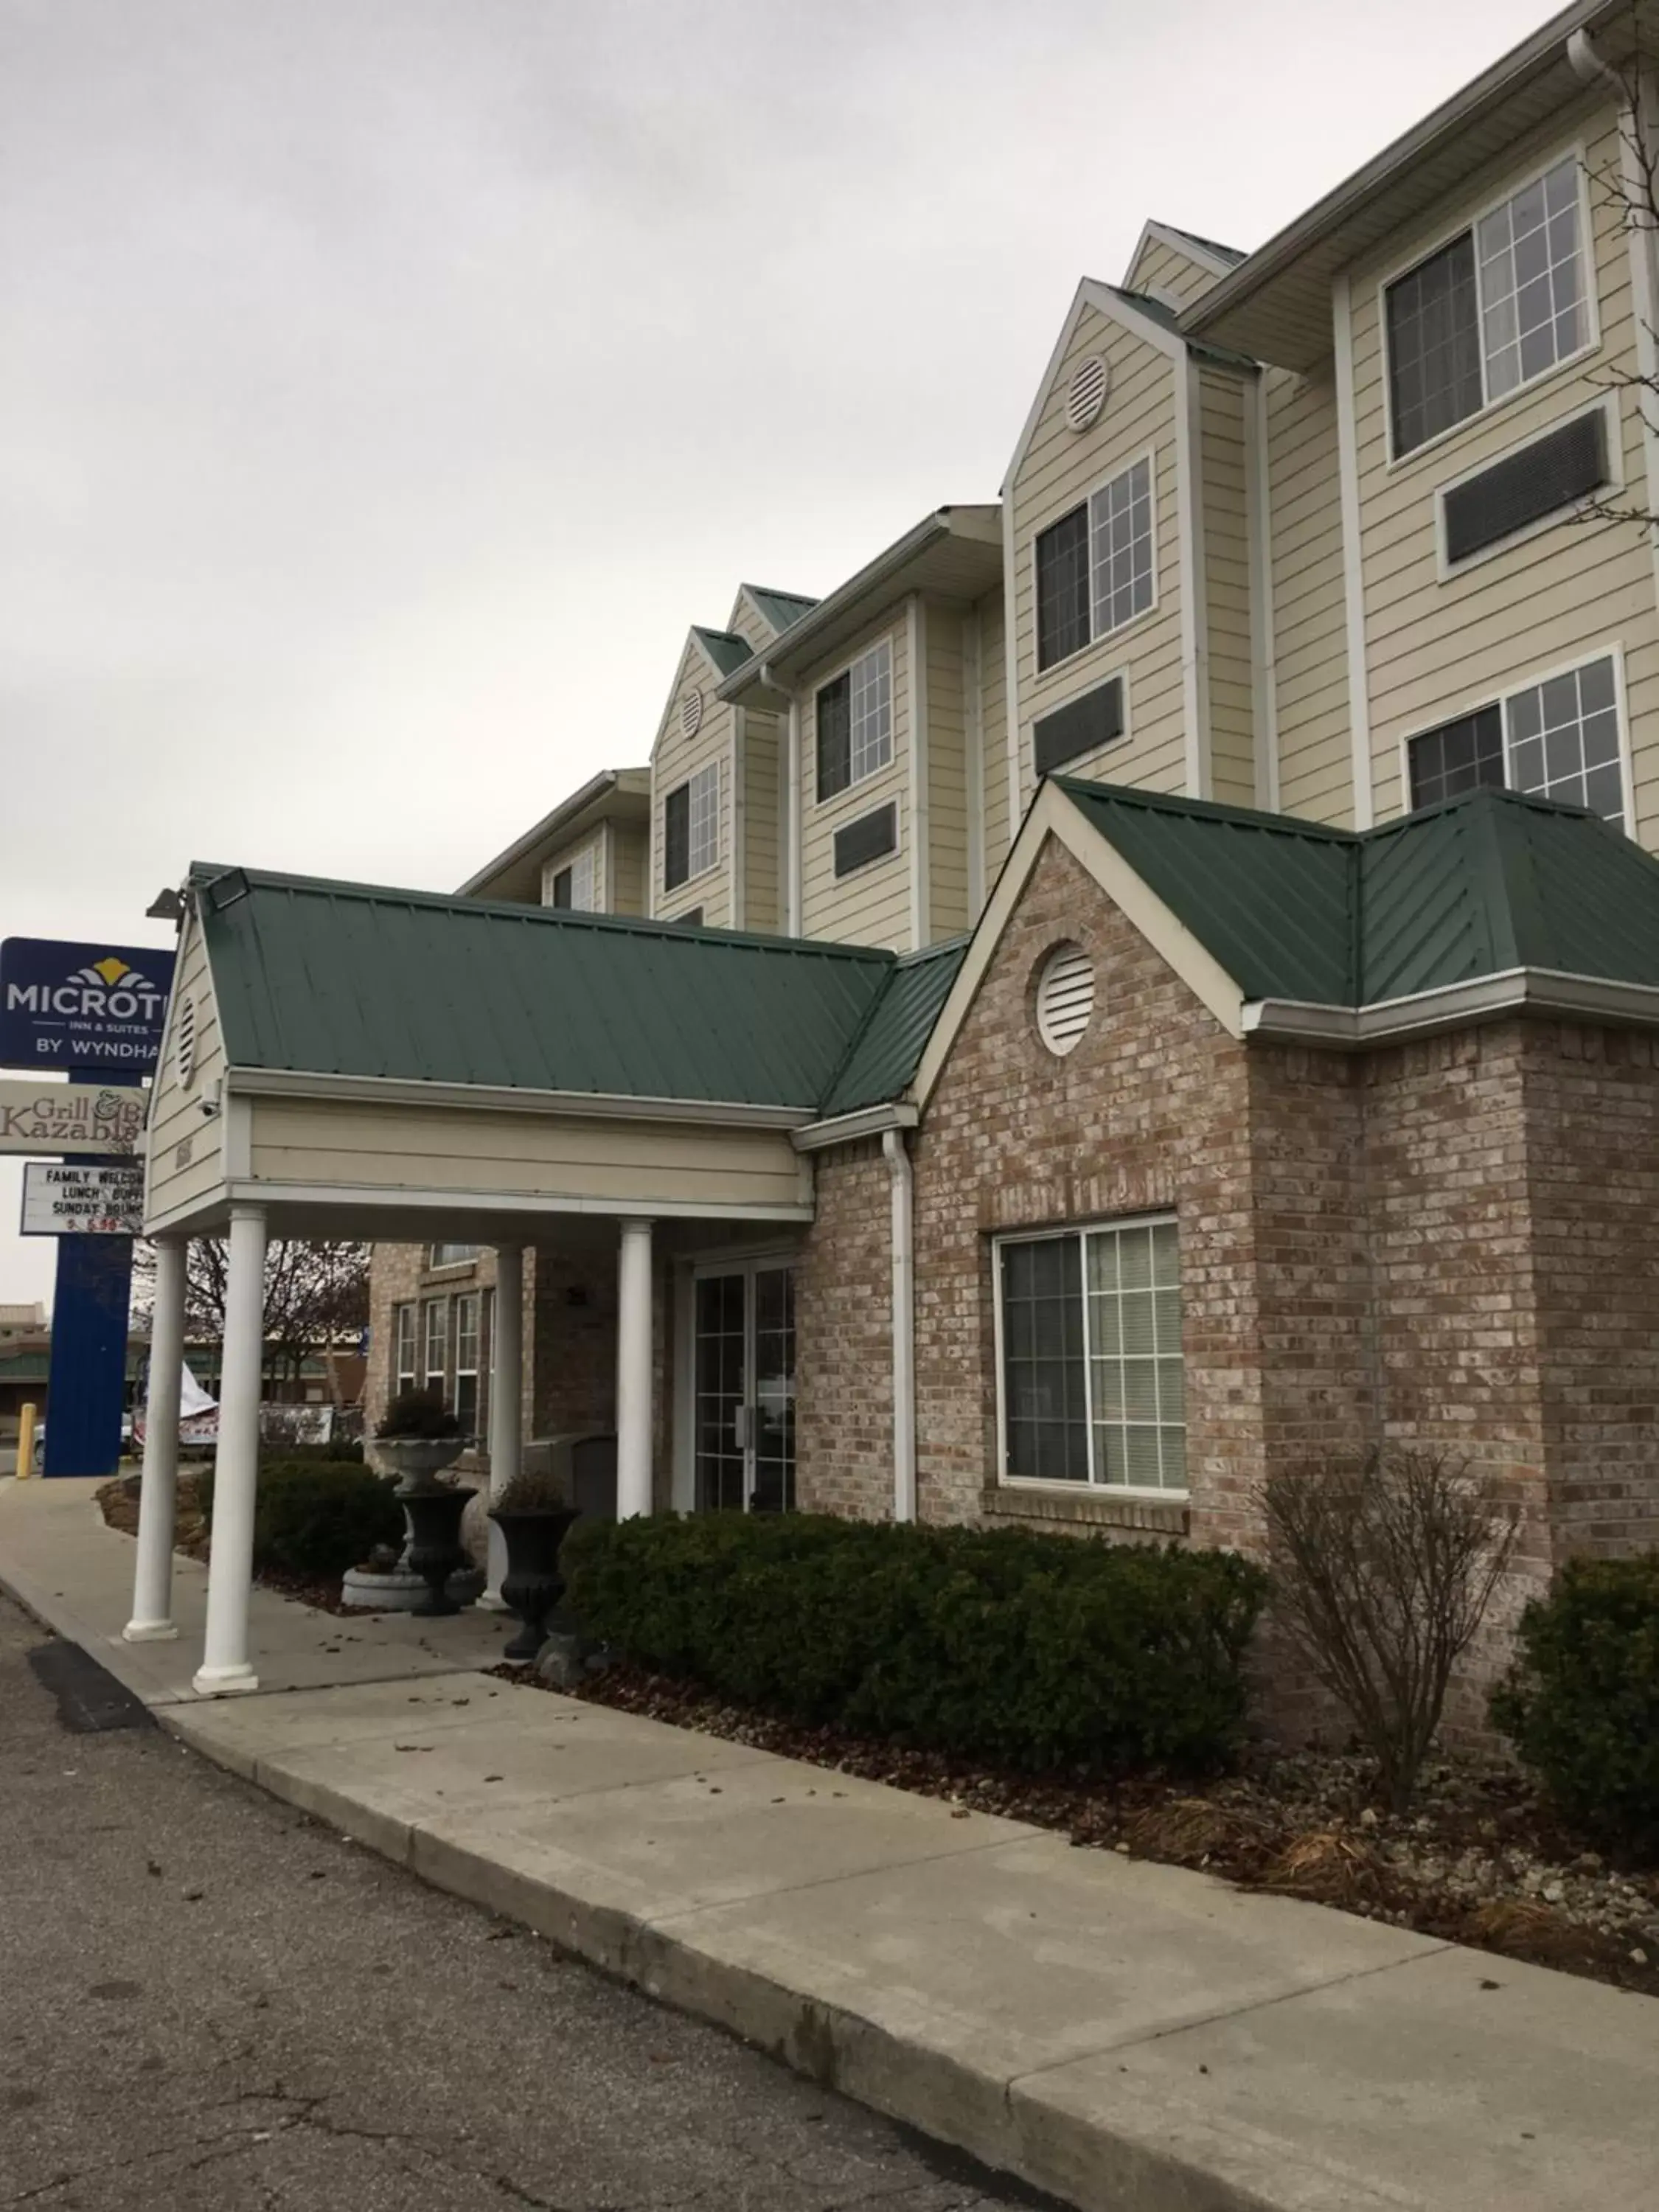 Facade/entrance, Property Building in Microtel Inn & Suites by Wyndham Indianapolis Airport